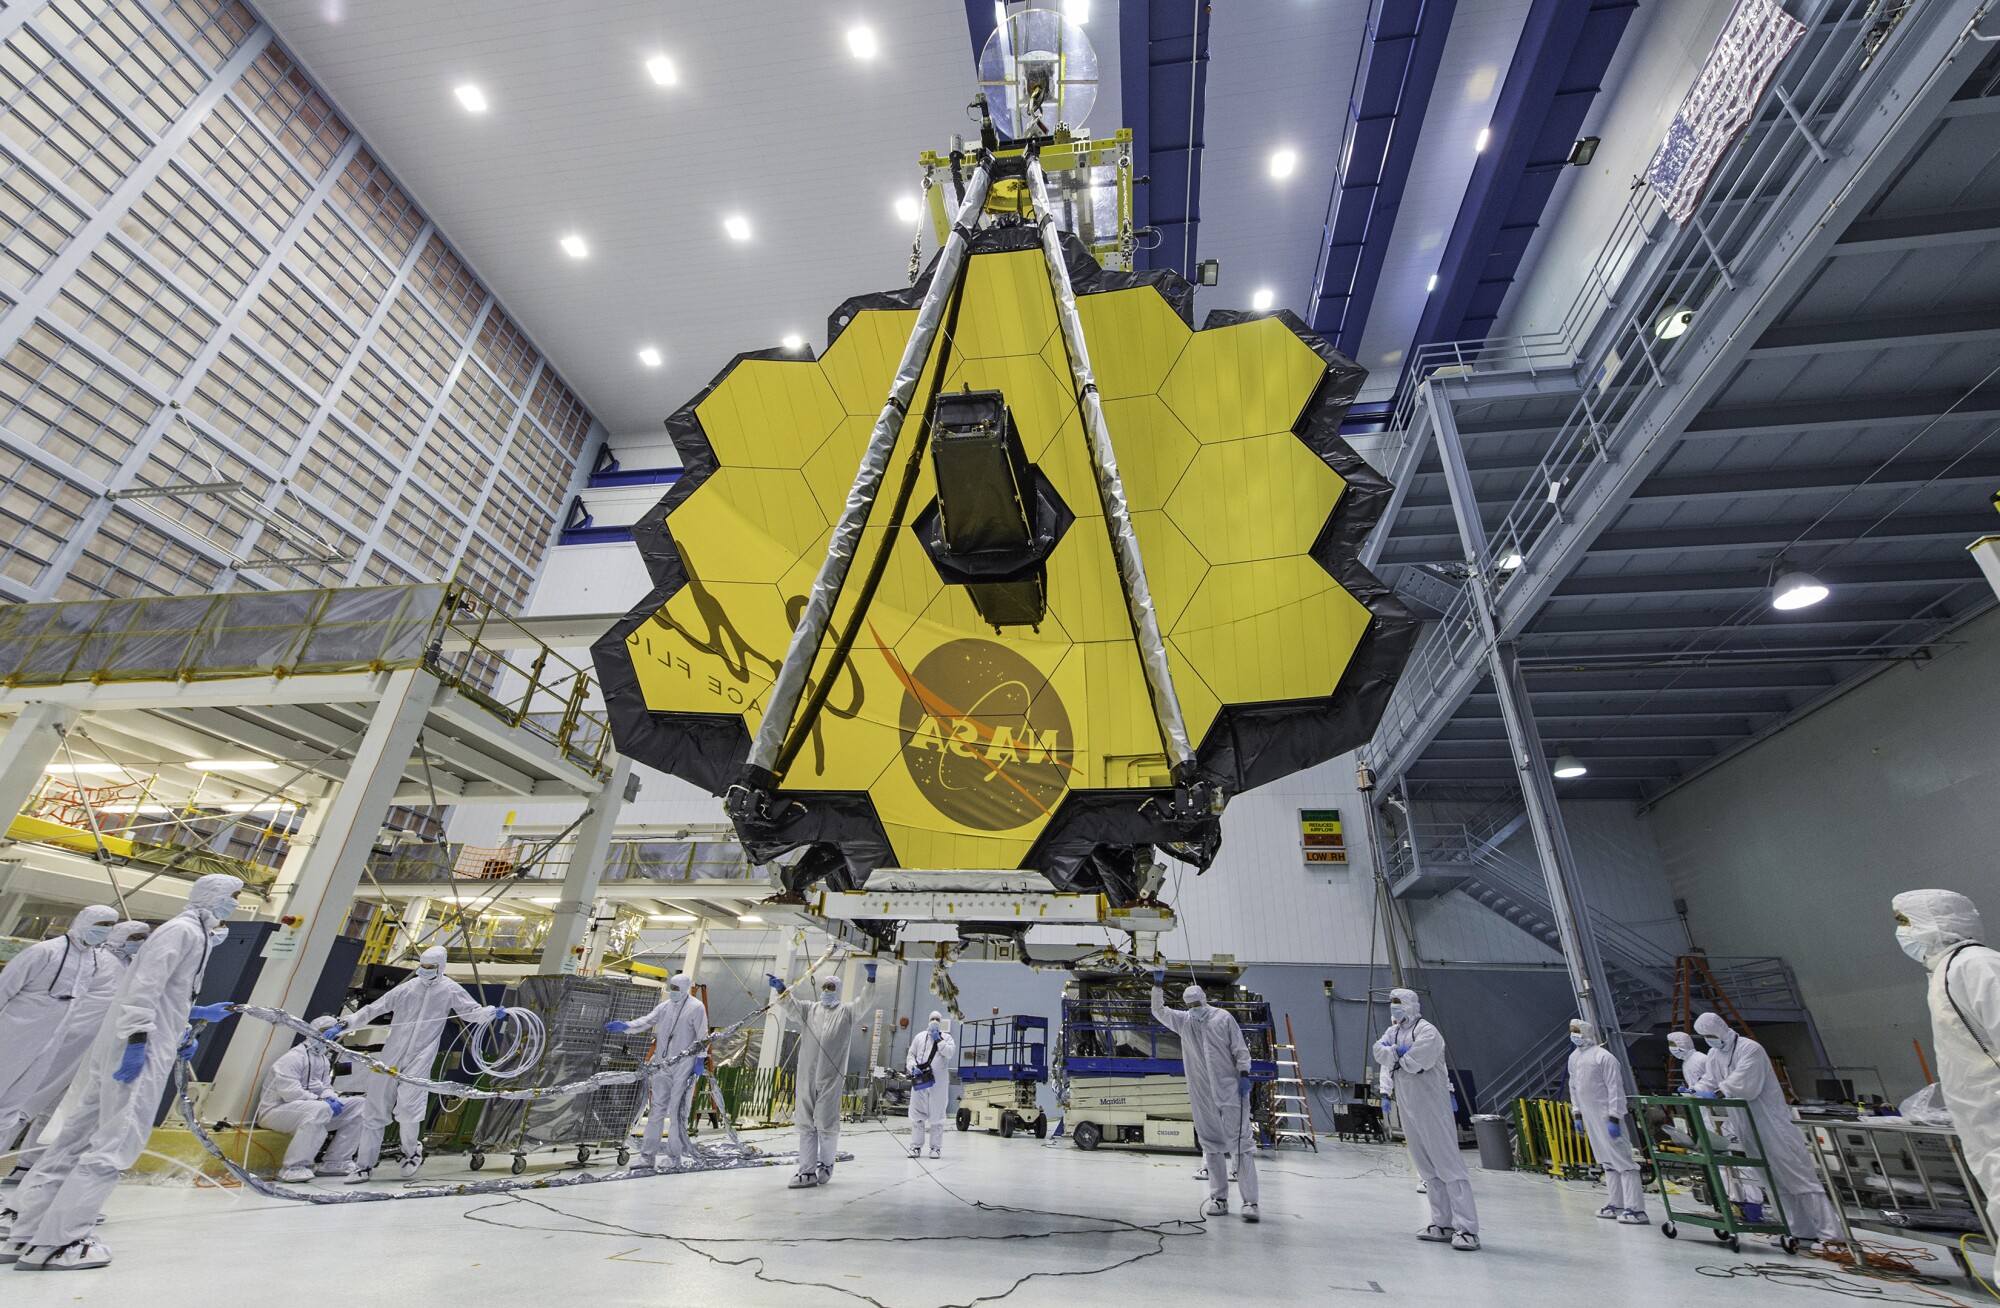 Technicians use a crane to lift the mirror of the James Webb Space Telescope at the Goddard Space Flight Center.